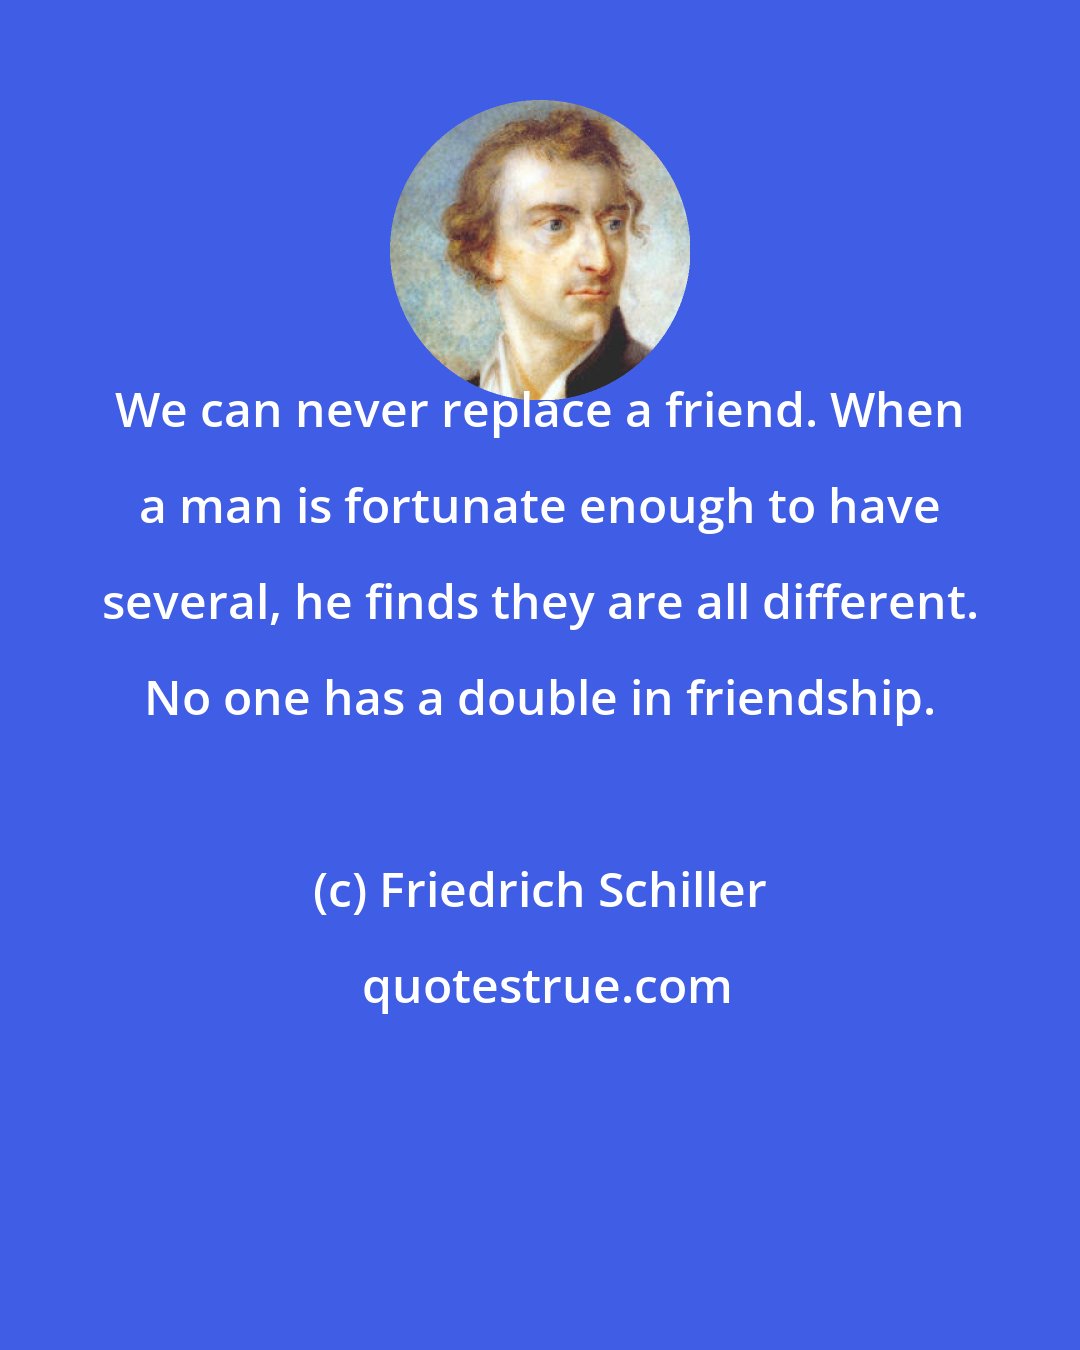 Friedrich Schiller: We can never replace a friend. When a man is fortunate enough to have several, he finds they are all different. No one has a double in friendship.